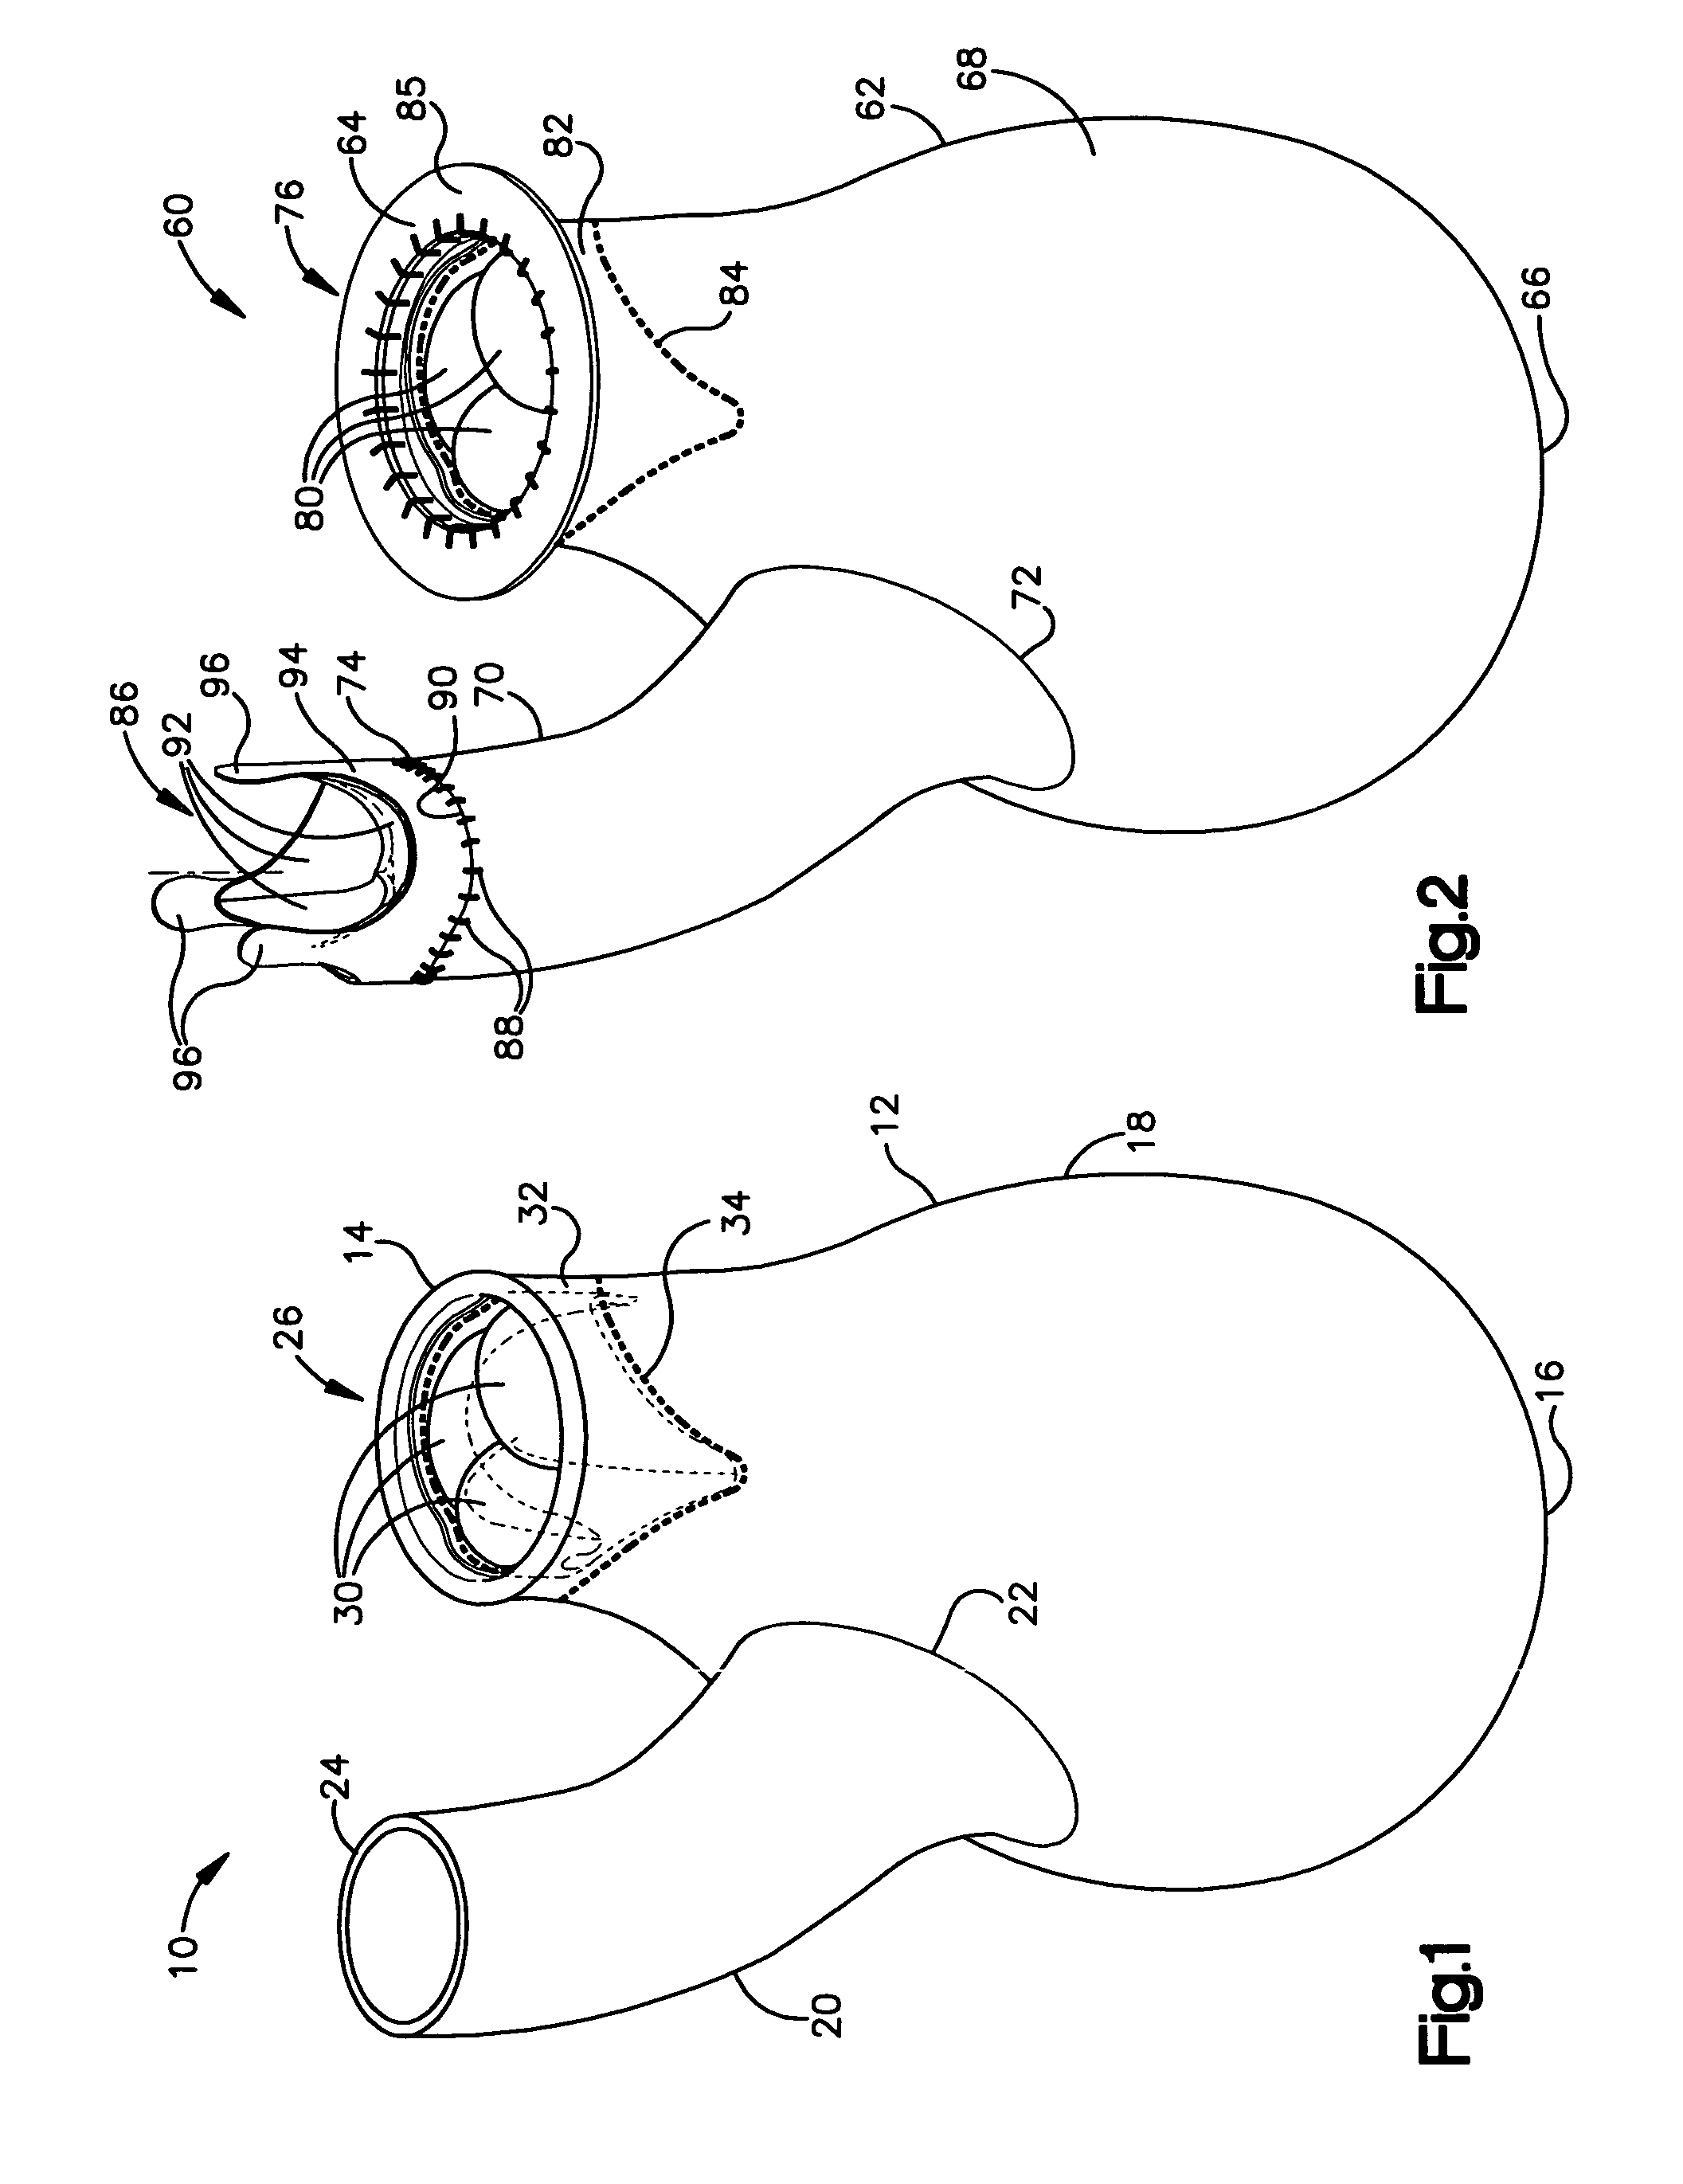 System and method for improving ventricular function